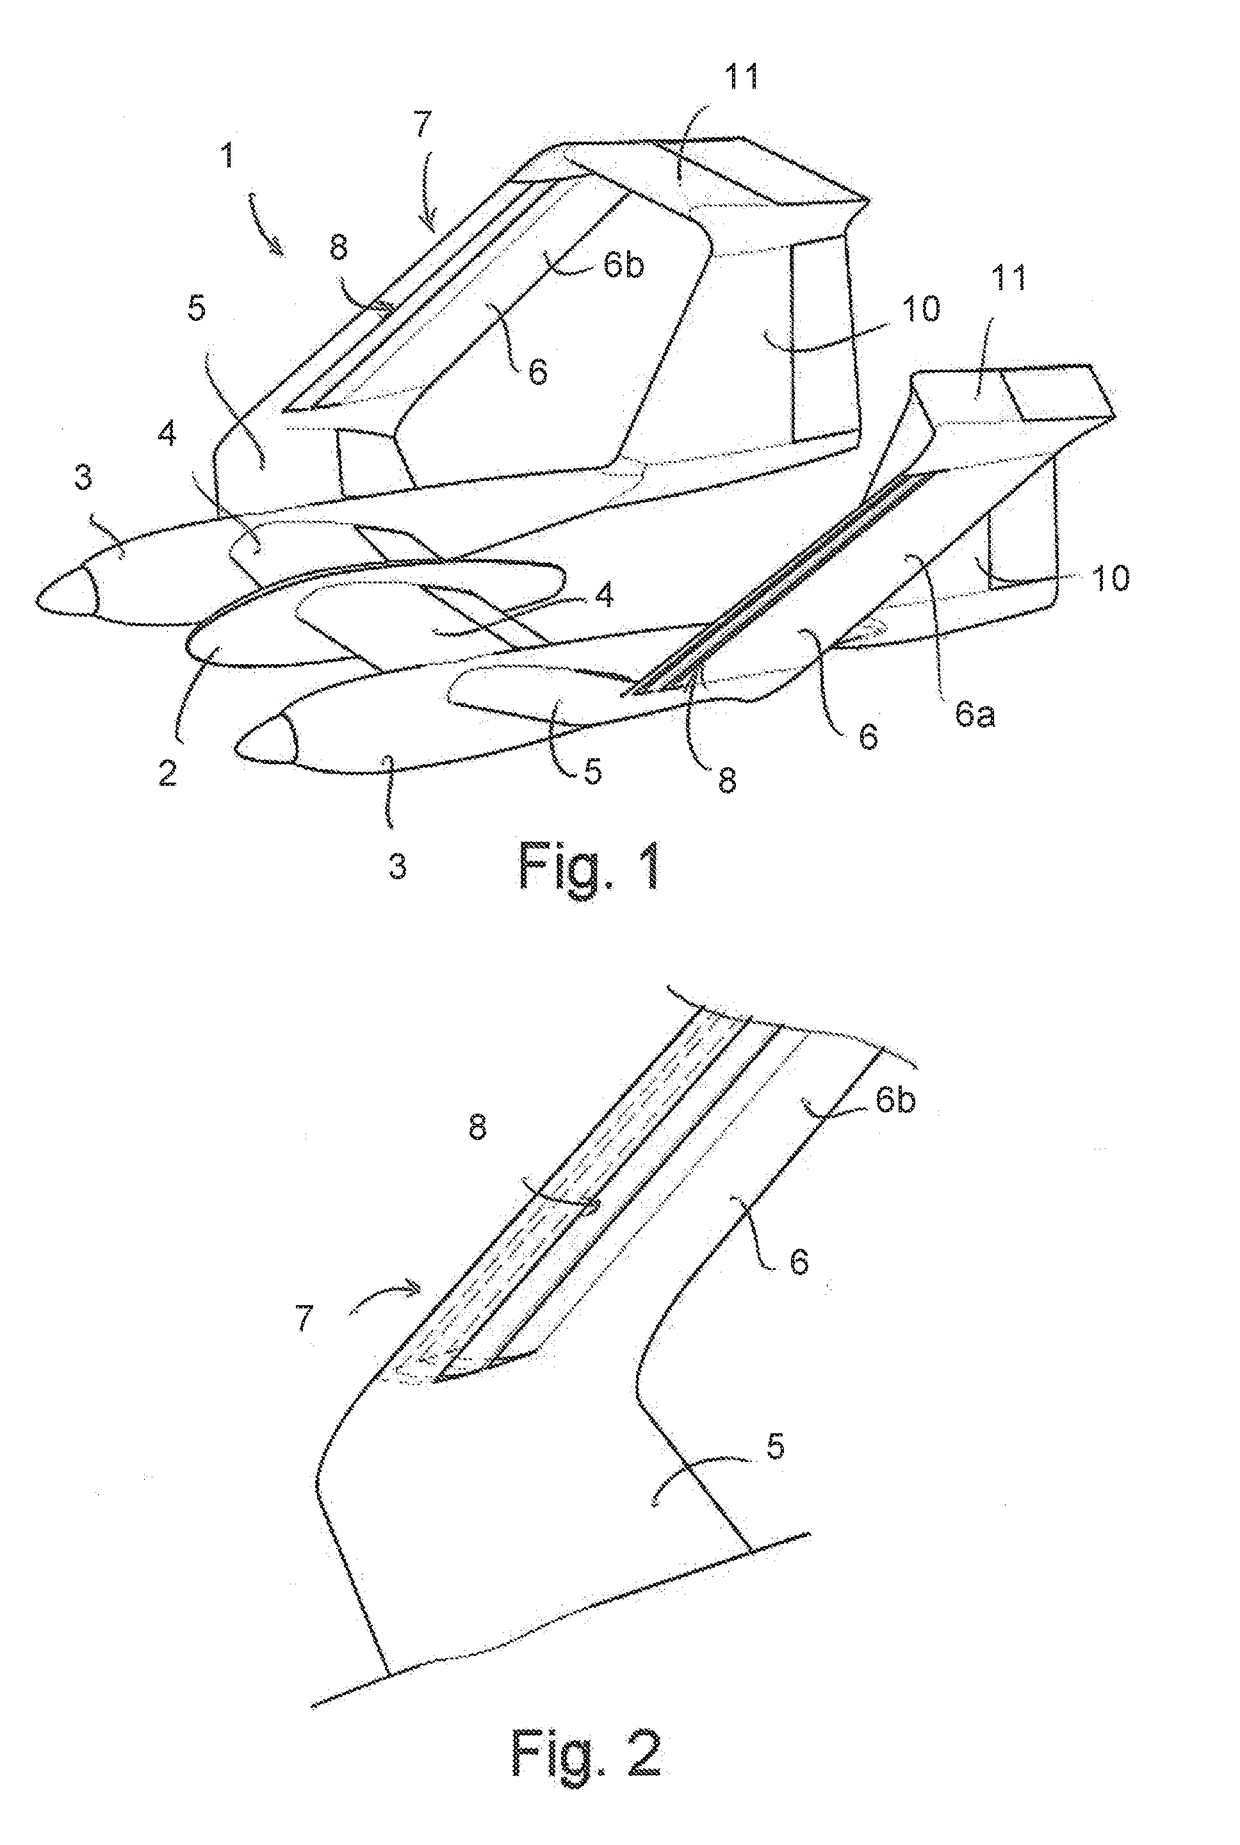 Fixed-wing aircraft with increased static stability